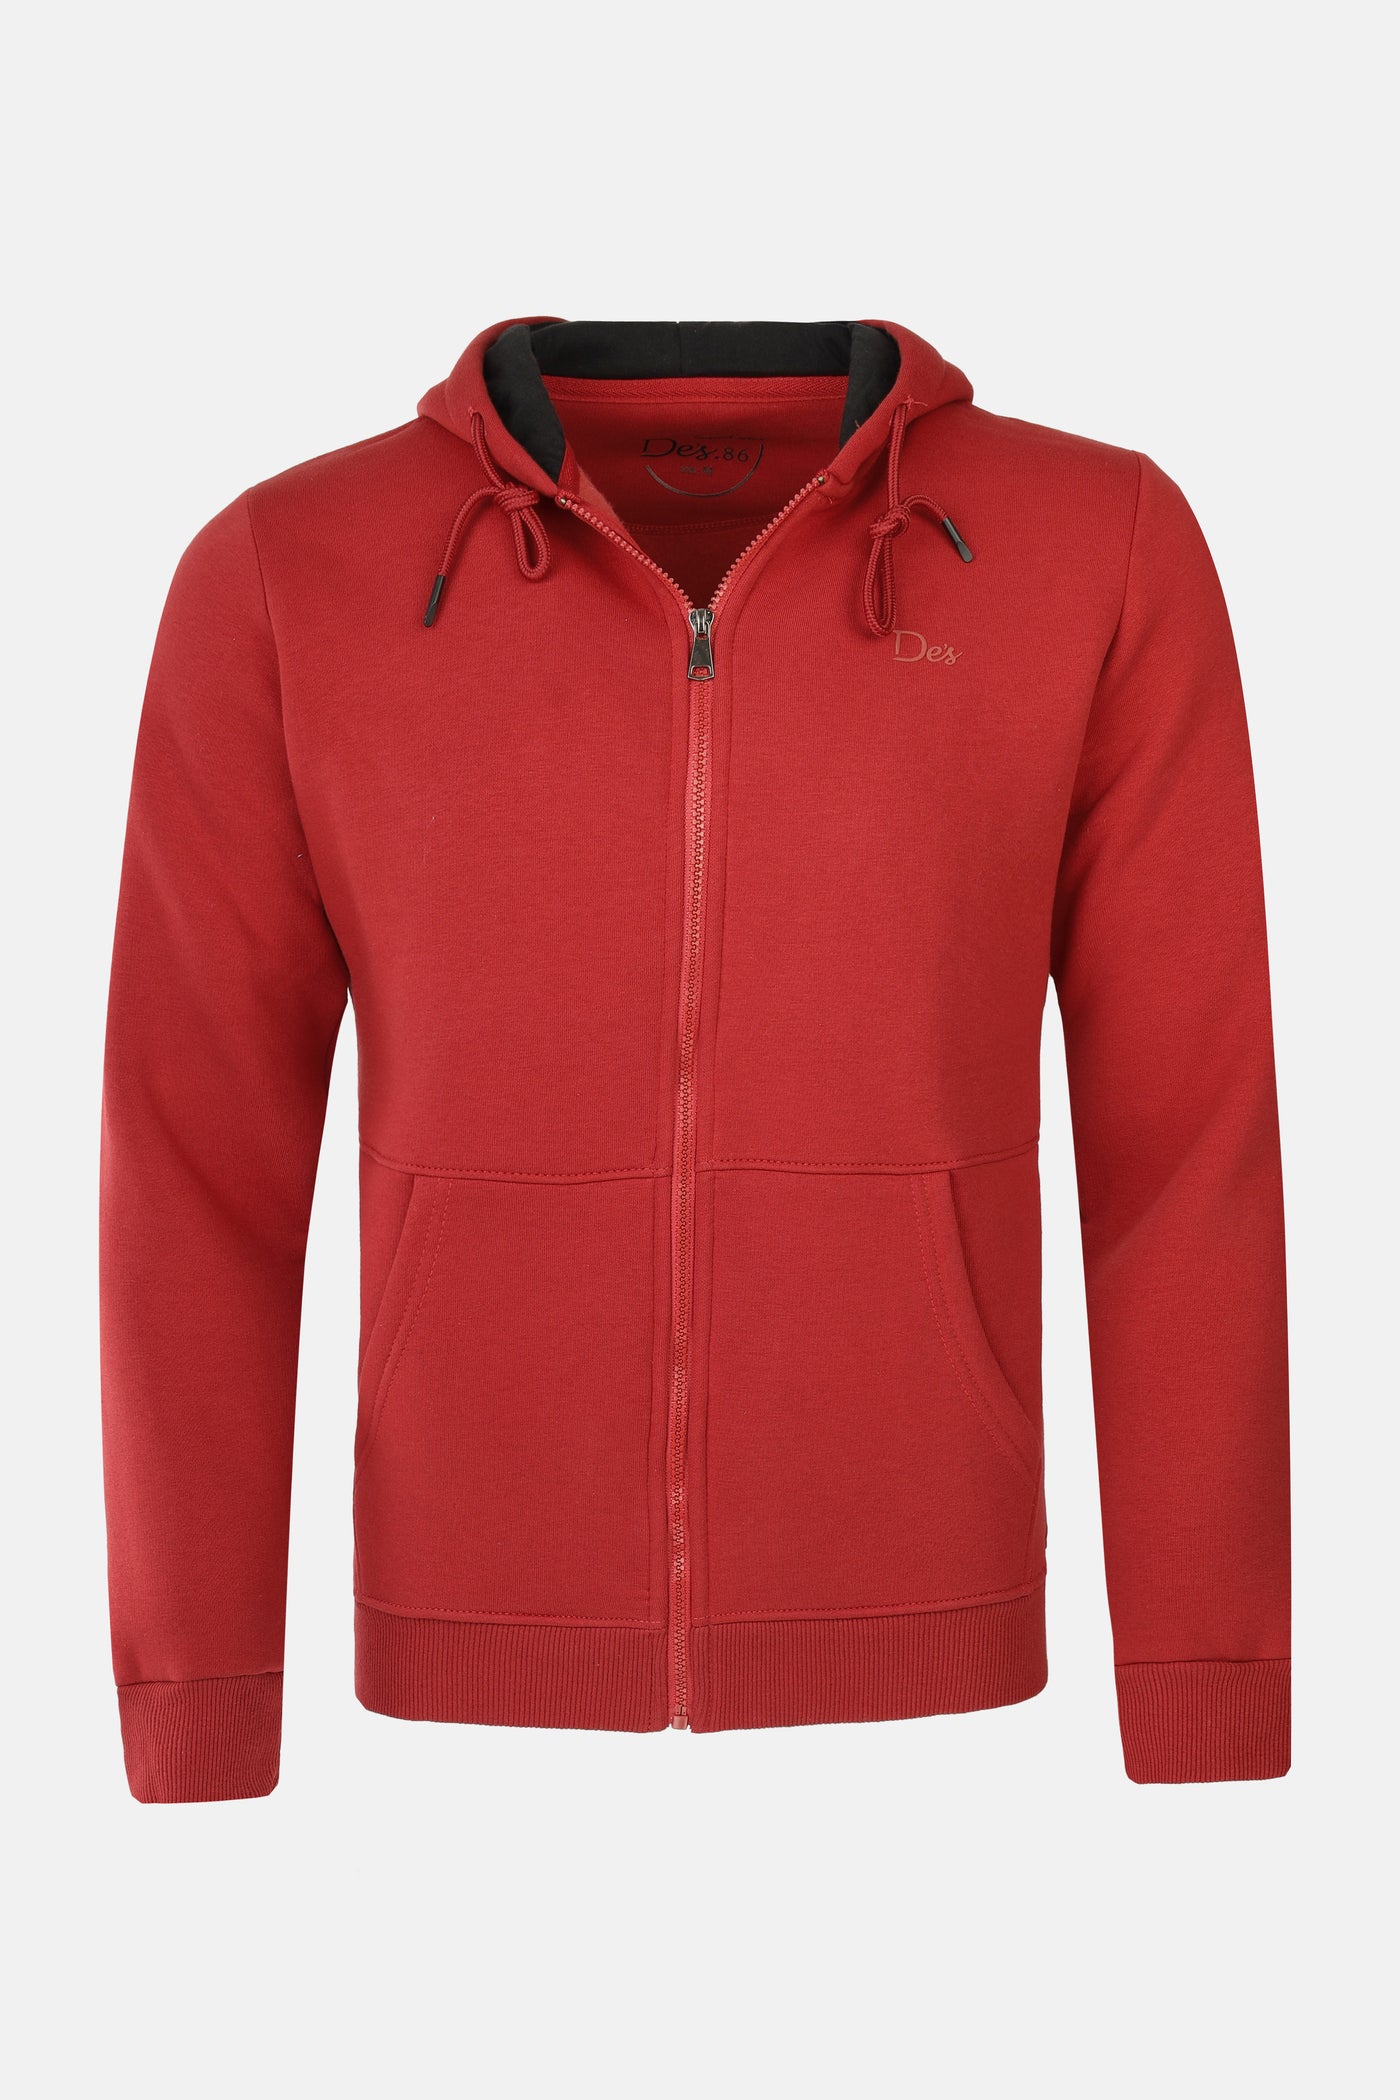 Solid Red Sport Jacket